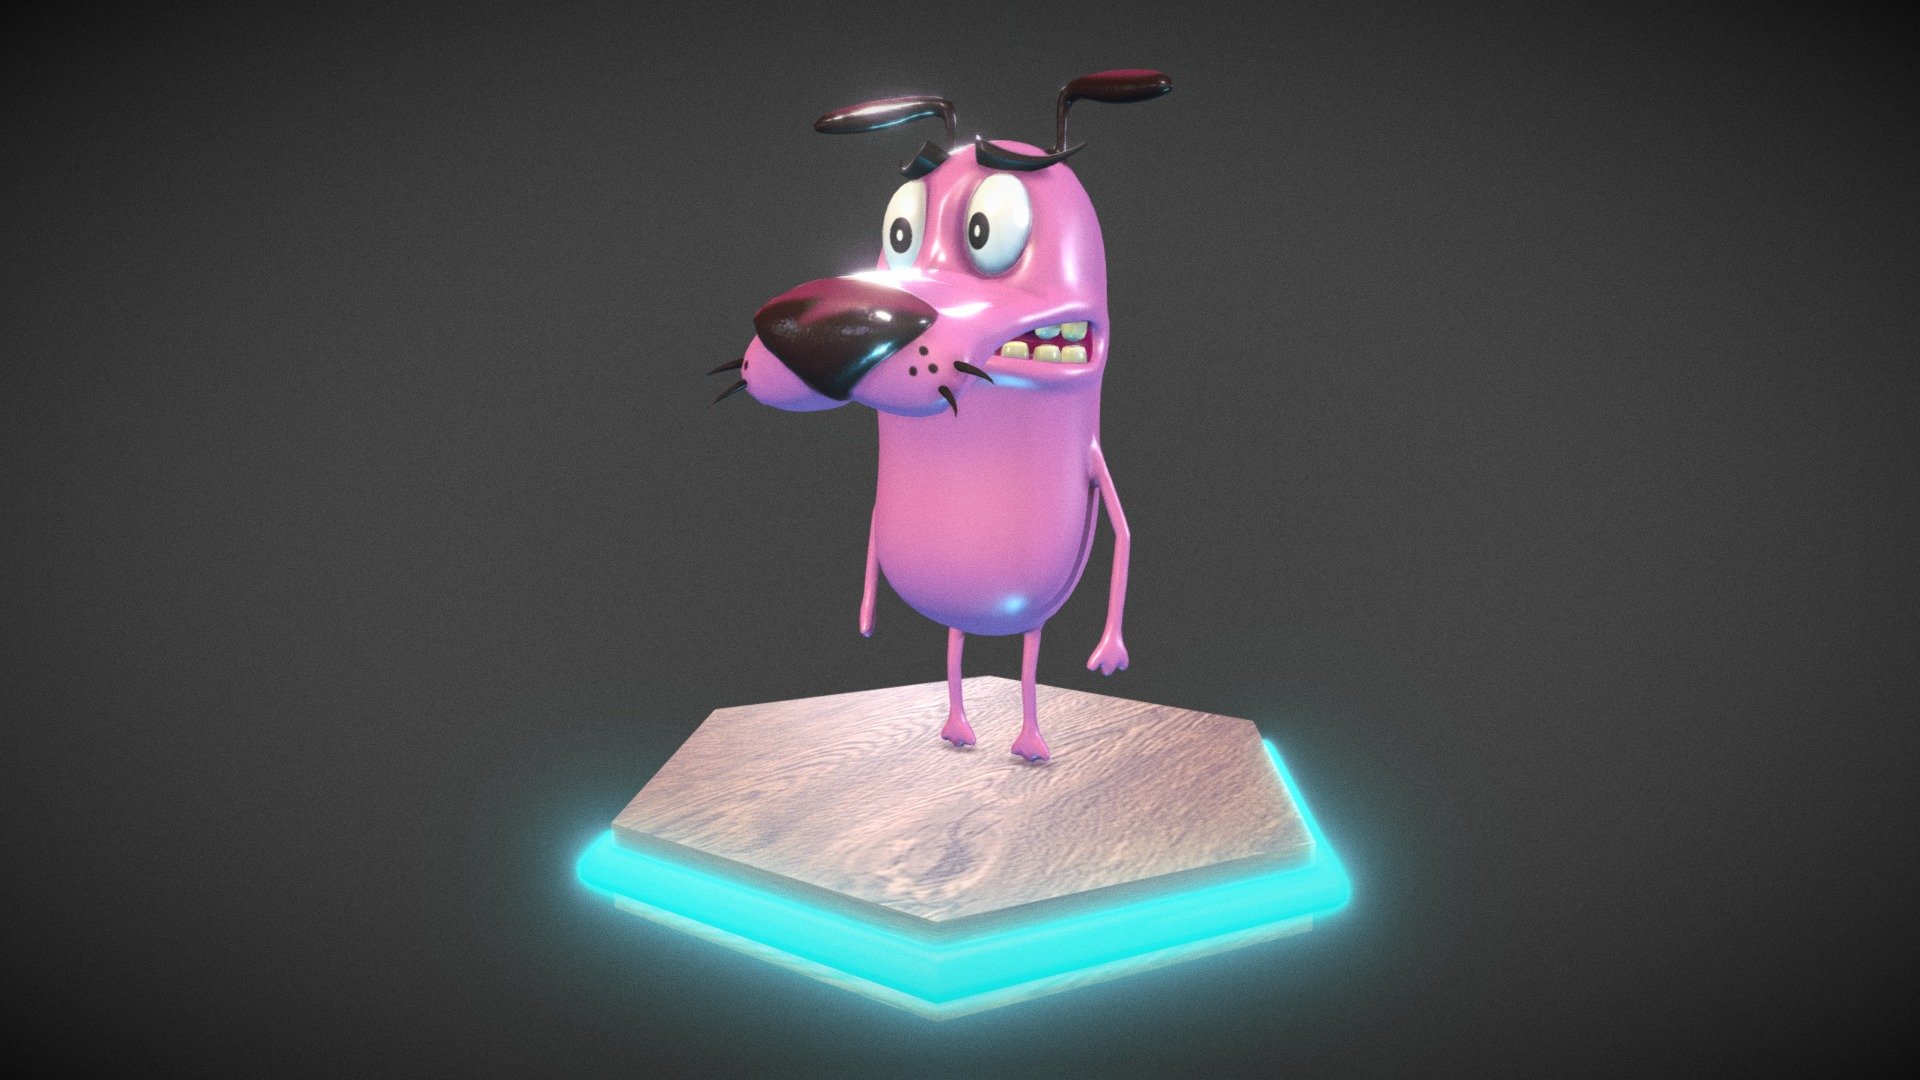 This is my Fan Art - Of animated cartoon Courage The Cowardly Dog, 
I hope you like it! =D

Model made with: Zbrush,Maya and Mudbox for more details: https://www.artstation.com/artwork/r31P2

Courage, the Cowardly Dog tells a story of Courage, a dog that lives on a farm with Muriel and Eustace Bagge in the fictional town of No Place in Kansas.

 - Courage The Cowardly Dog - 3D model by Kaique Tavares (@kaiquetavares) 3d model